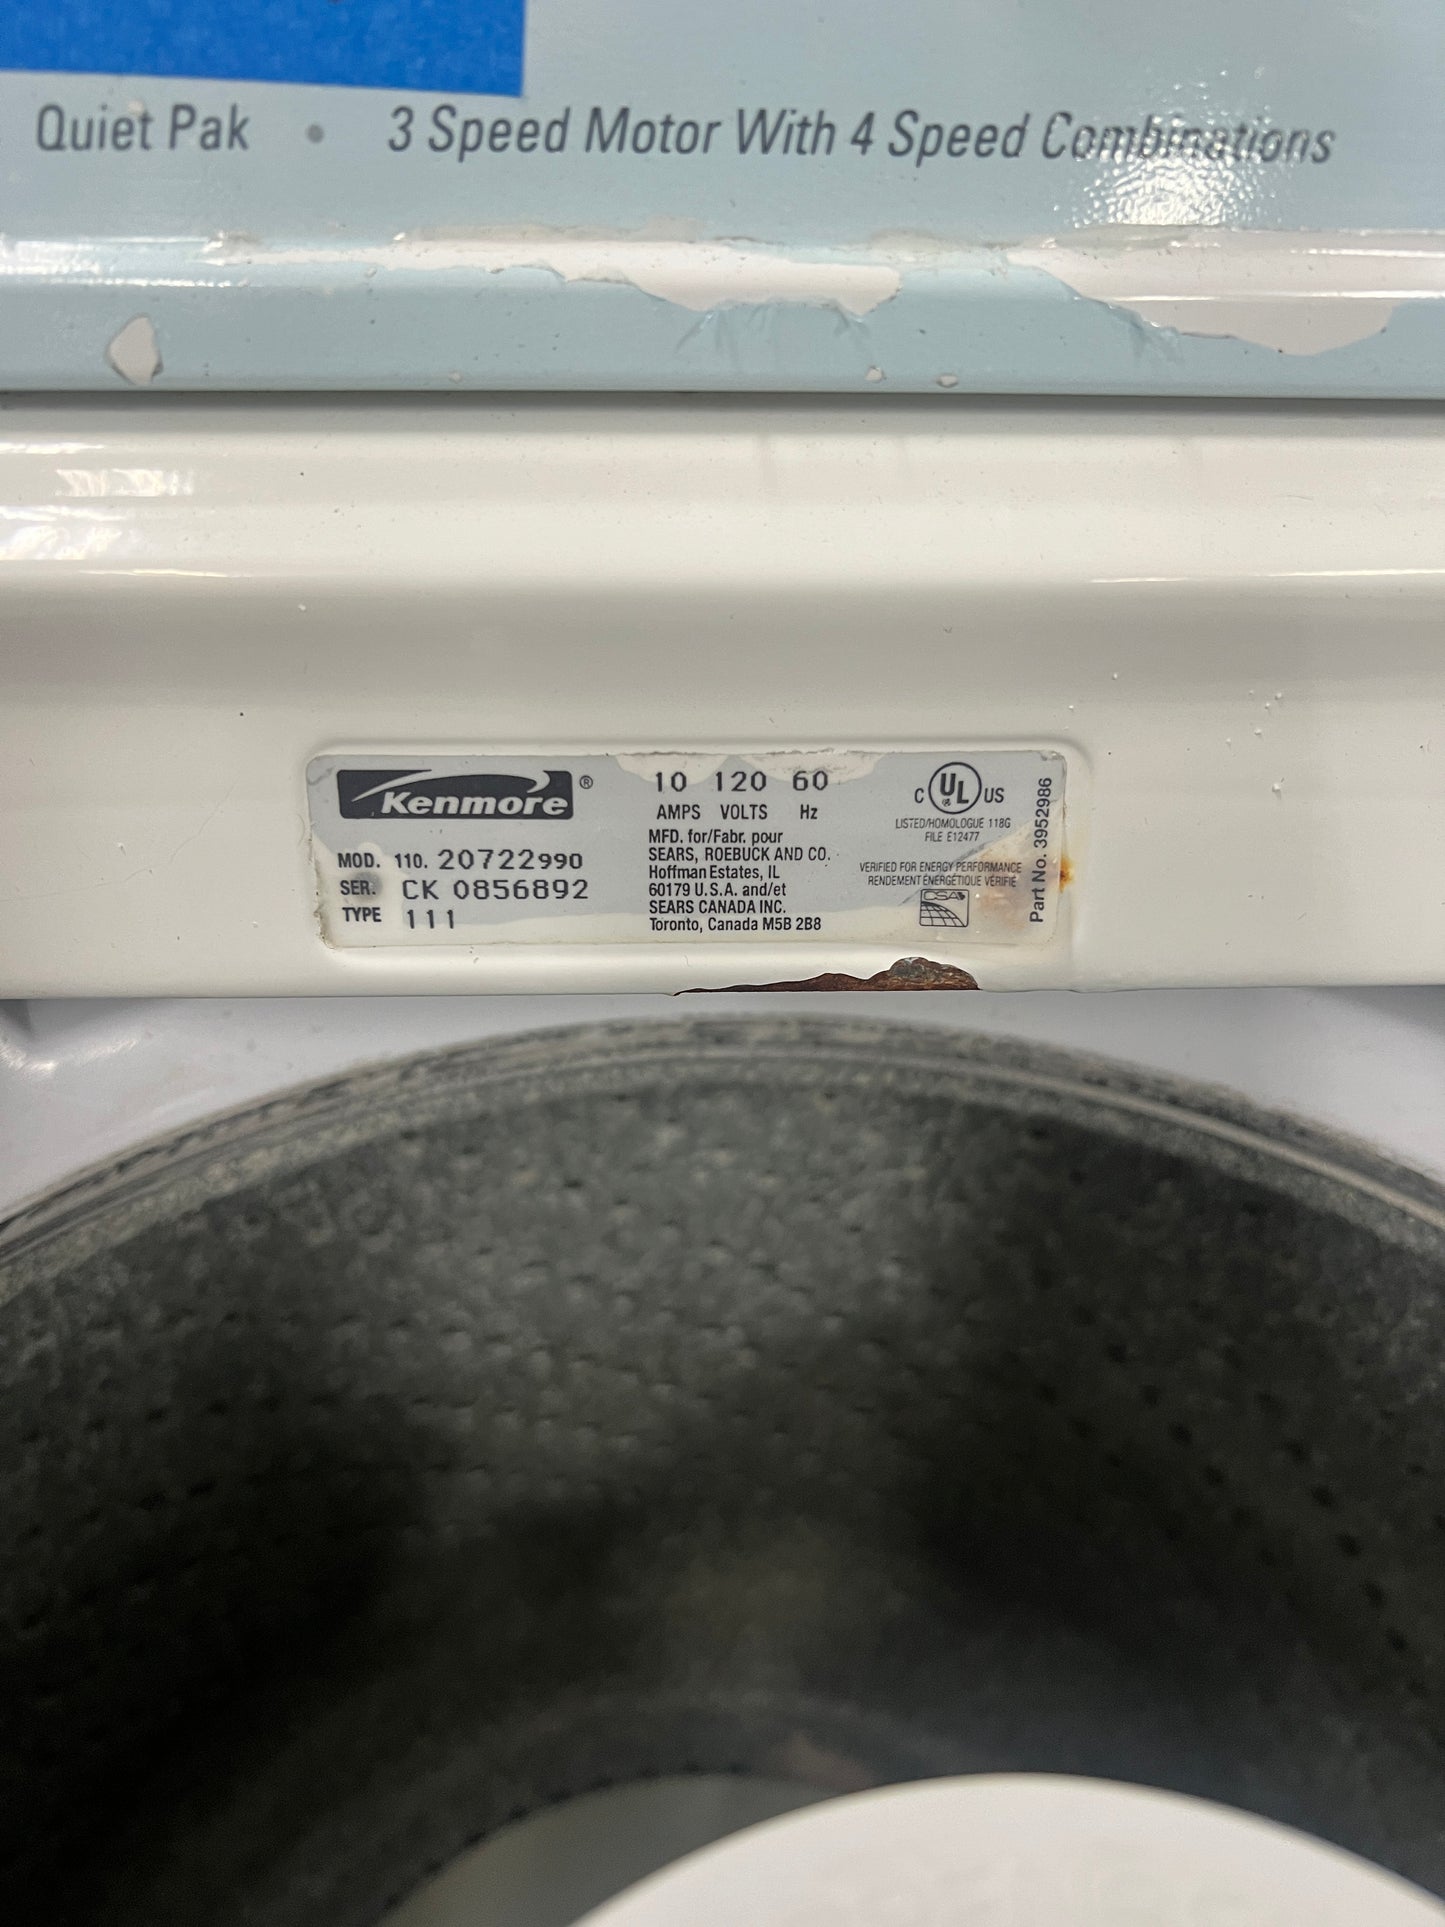 Kenmore 70 Series Top Load Washer In White, 110.20722990, 999642